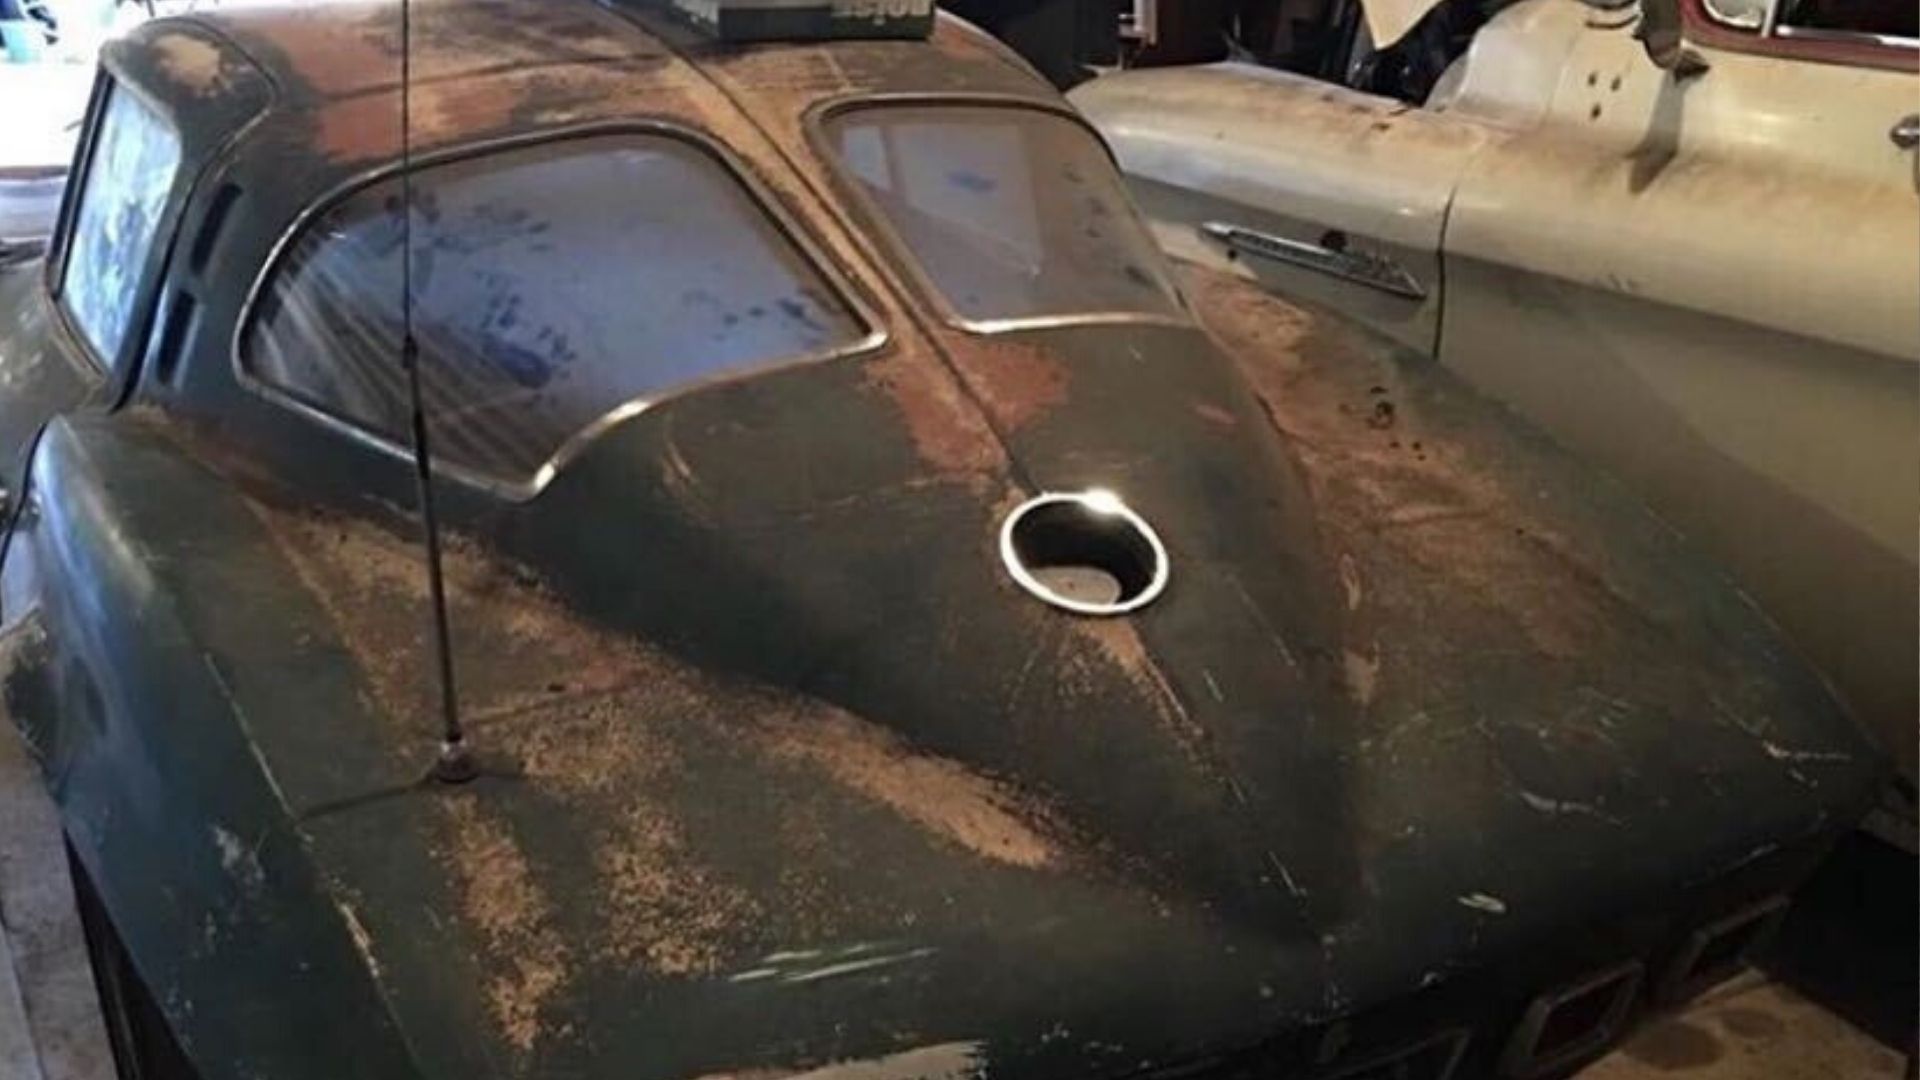 news, sports, american, newsletter, highlights, muscle, handpicked, client, classic, modern classic, europe, features, luxury, trucks, celebrity, off-road, german, someone junked this 1963 corvette z06 split window